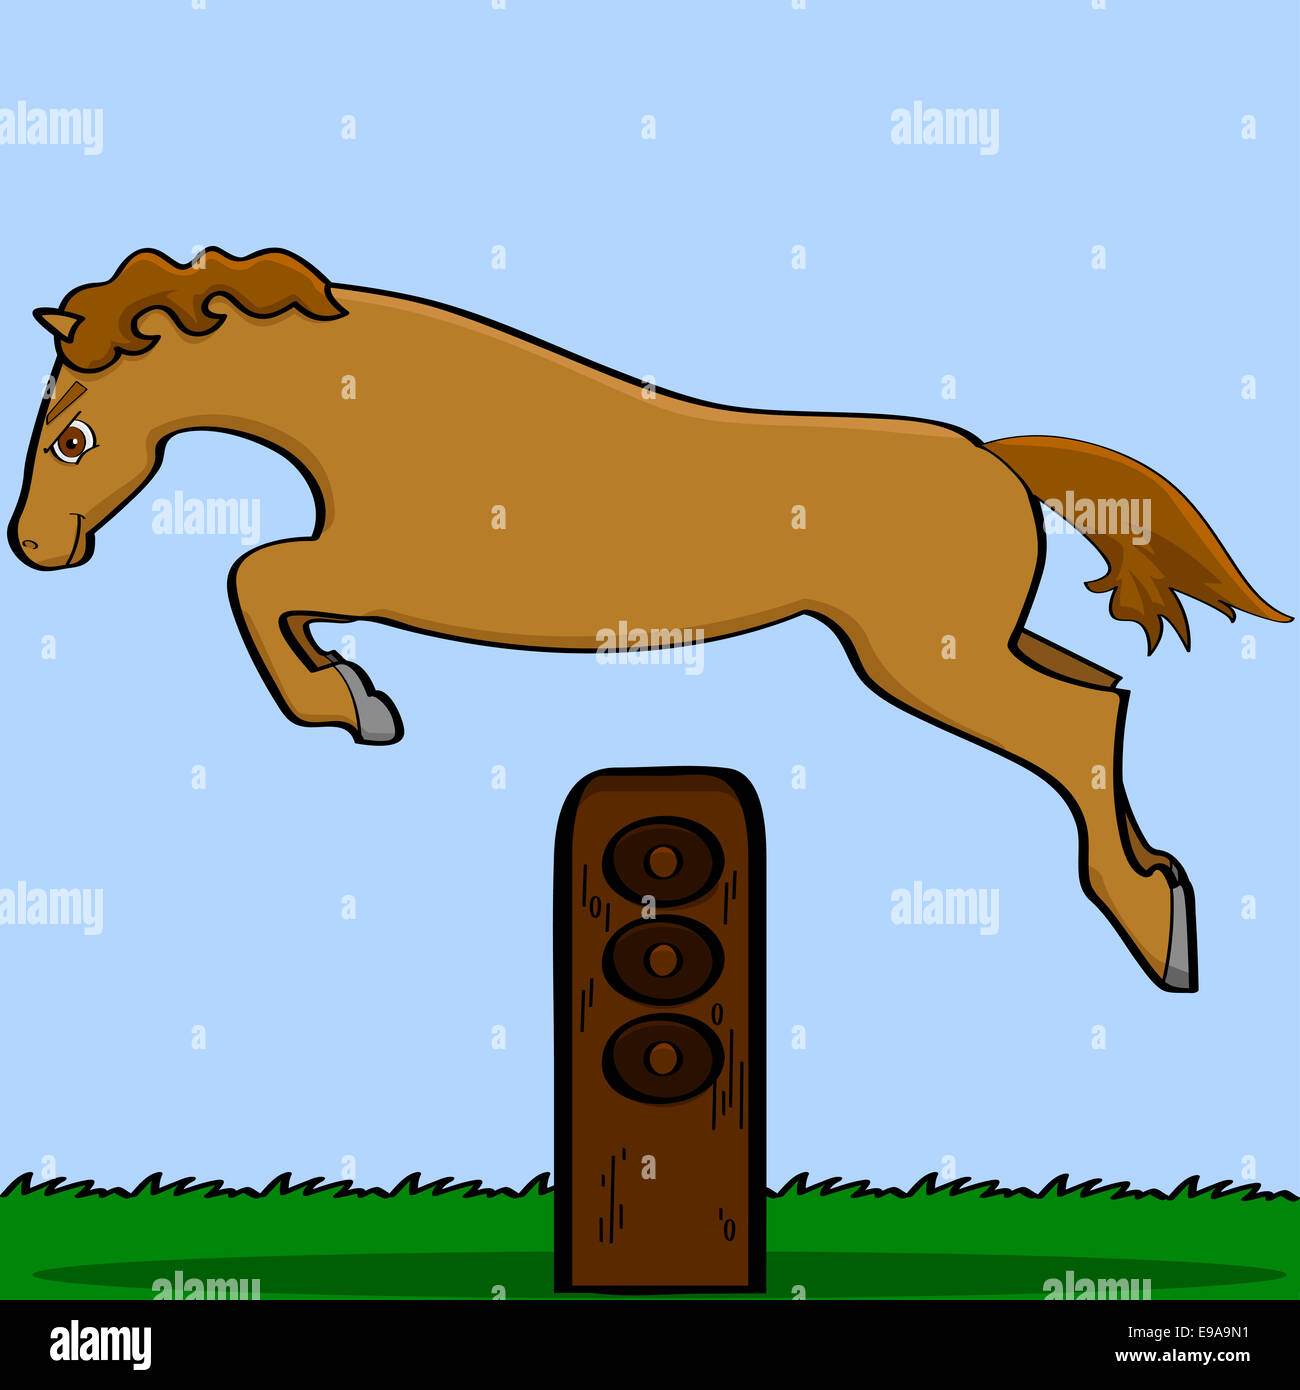 Cartoon horse jumping over an obstacle Stock Photo